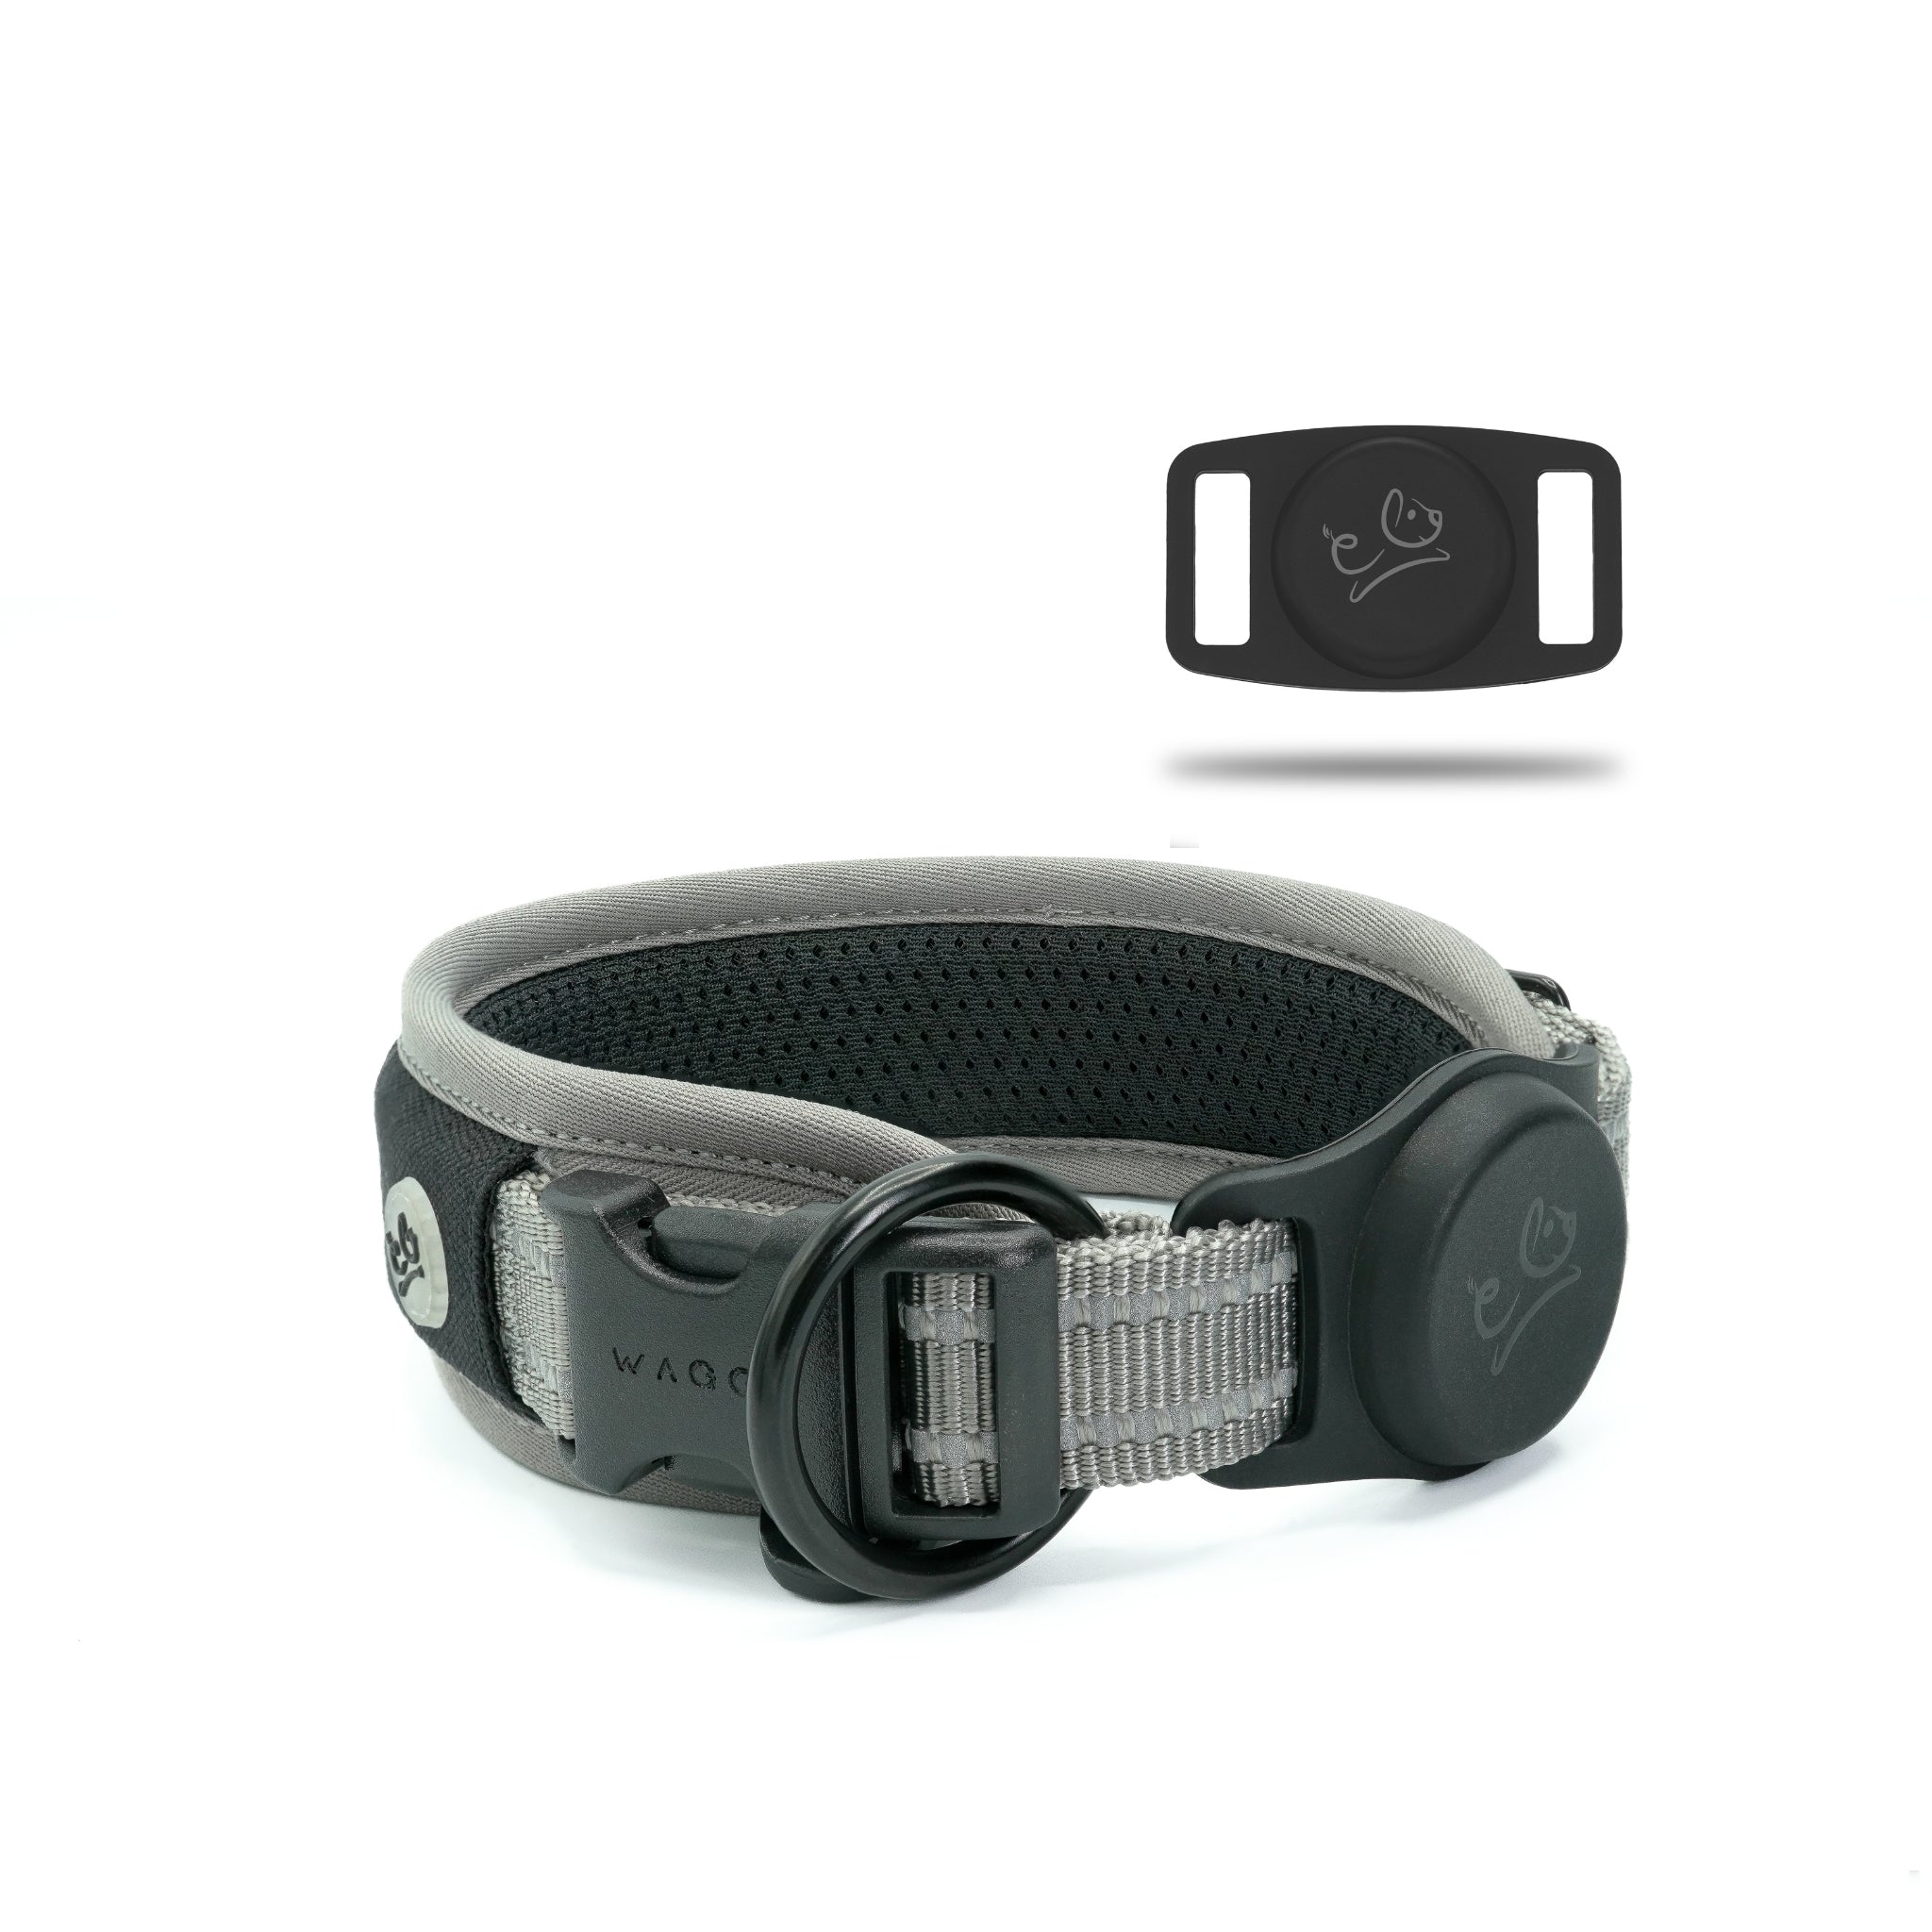 Grey Air Mesh dog collar in the center showing details of the 3M reflective stitching &amp; airtag holder attached to the collar. Airtag holder on the right corner with Waggy logo.